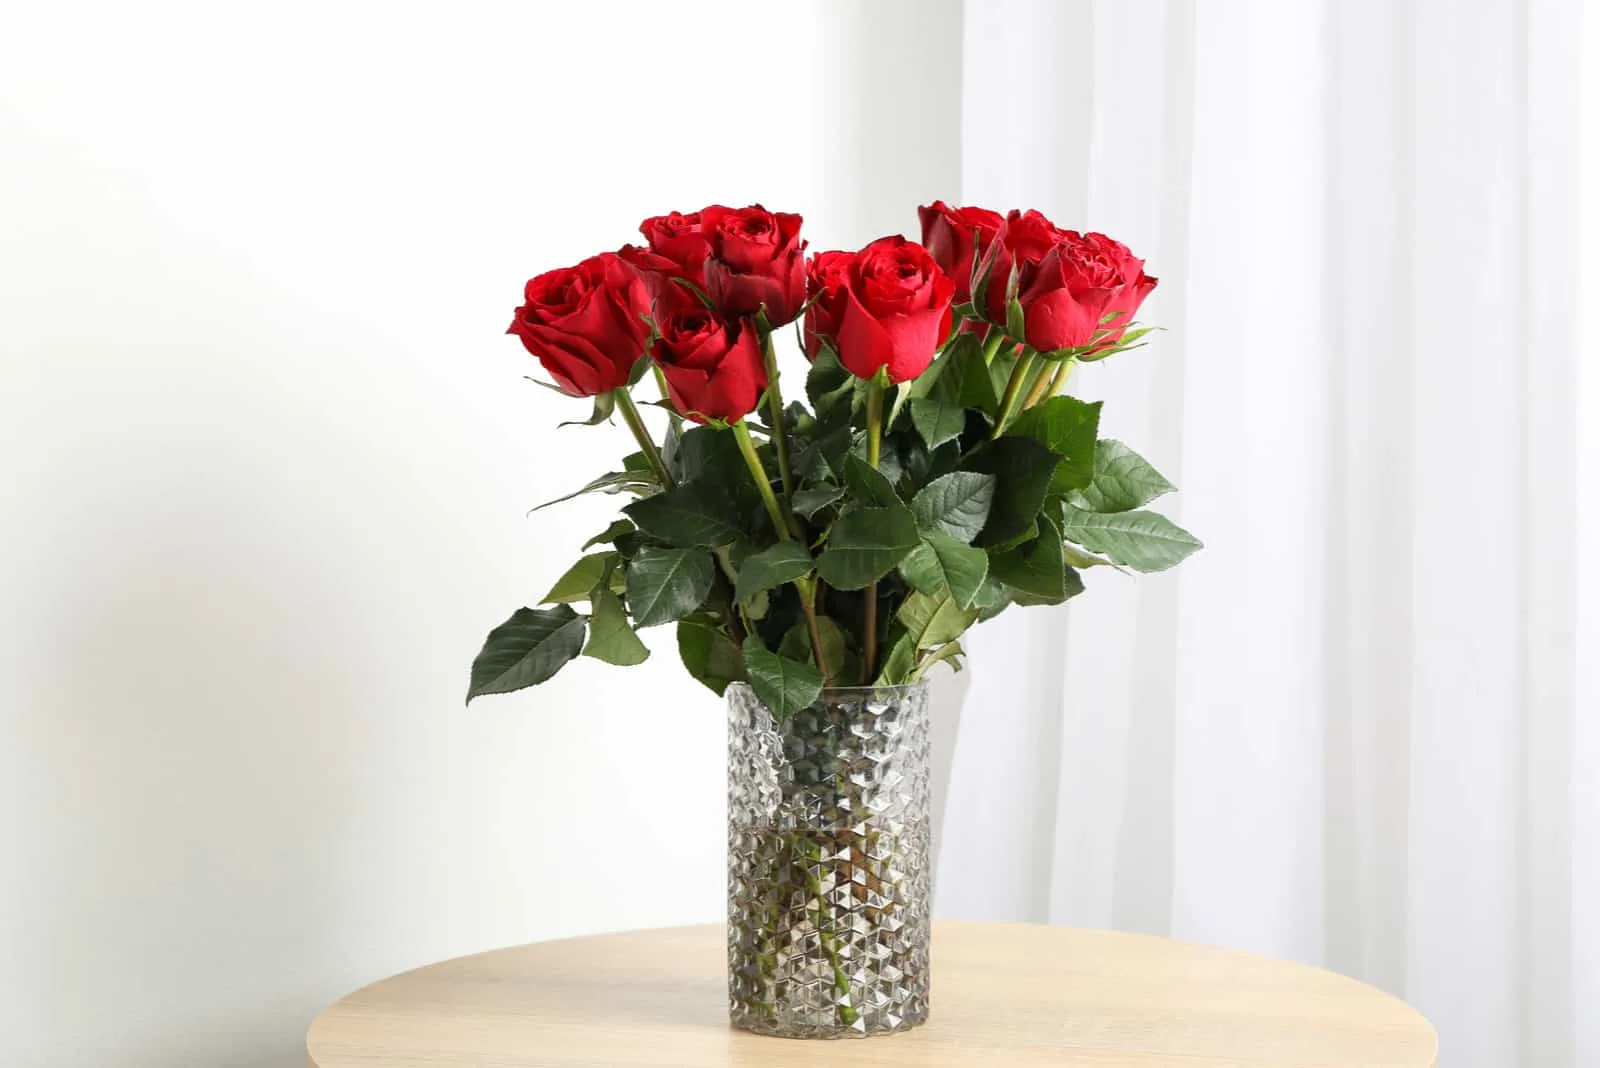 red roses in vase on the table